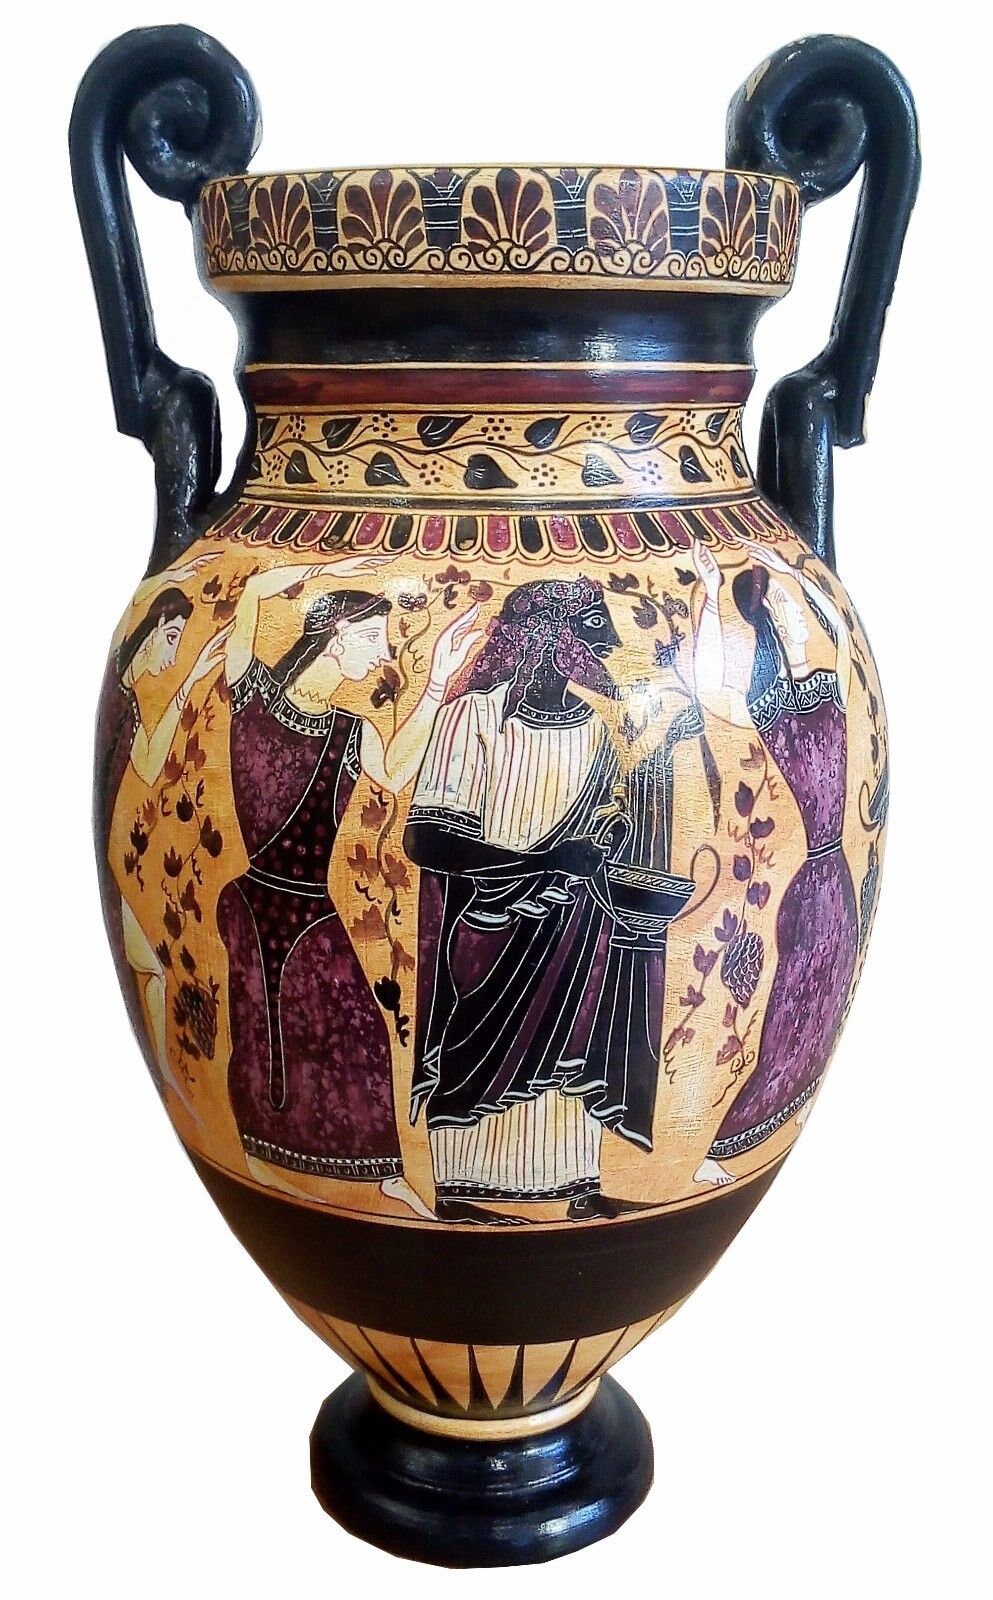 Dionysus Feast - Great Dionysia - Wine God - Satyr Companion - Ancient Greek Amphora Vase - 450 BC - National Museum Athens - Reproduction